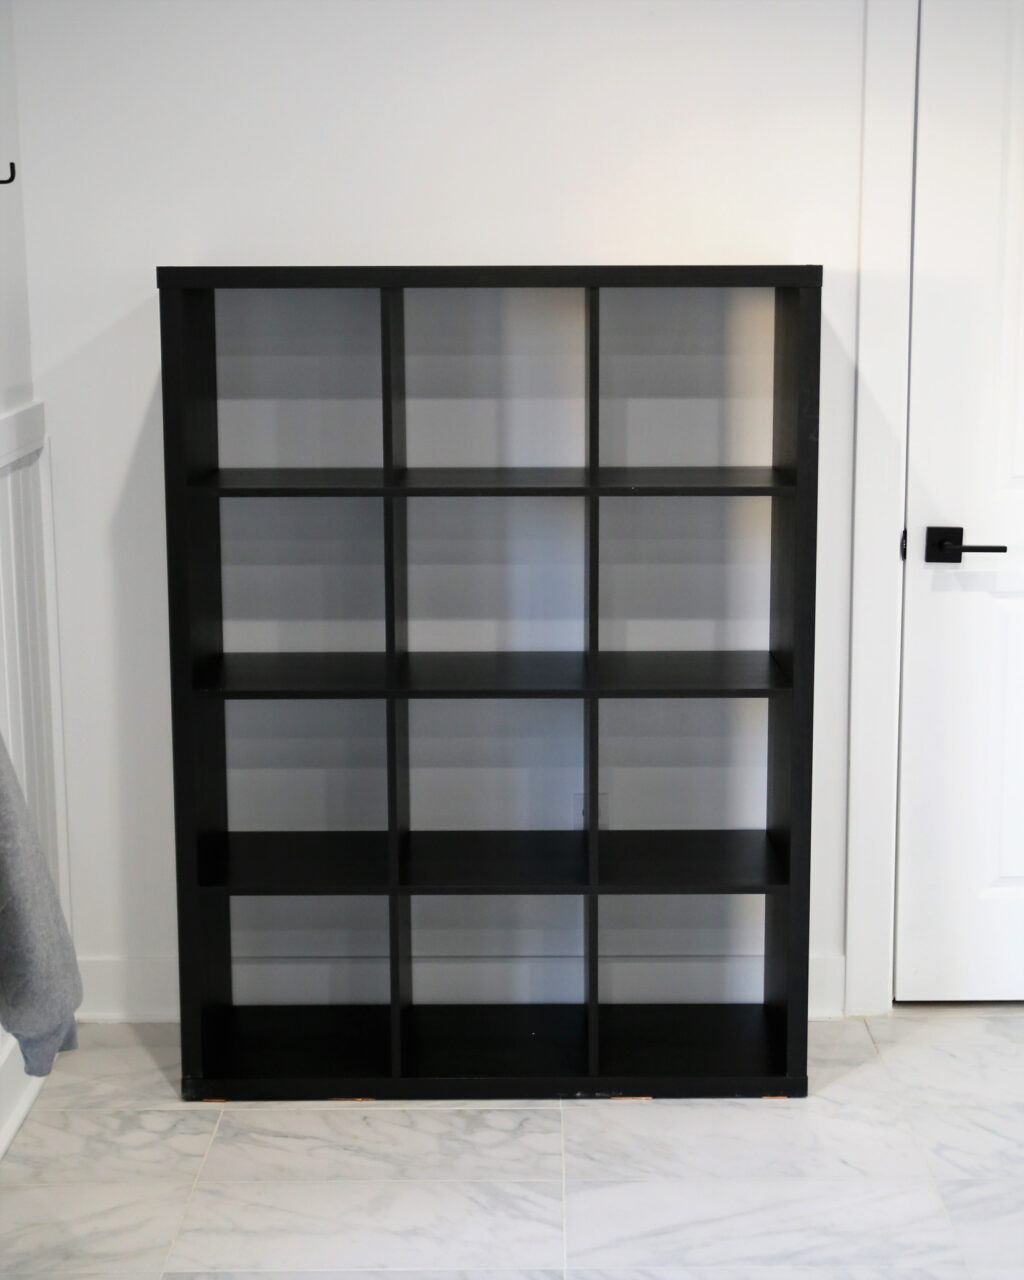 A black storage cabinet with 3 columns and 4 rows for students to store their personal items during class